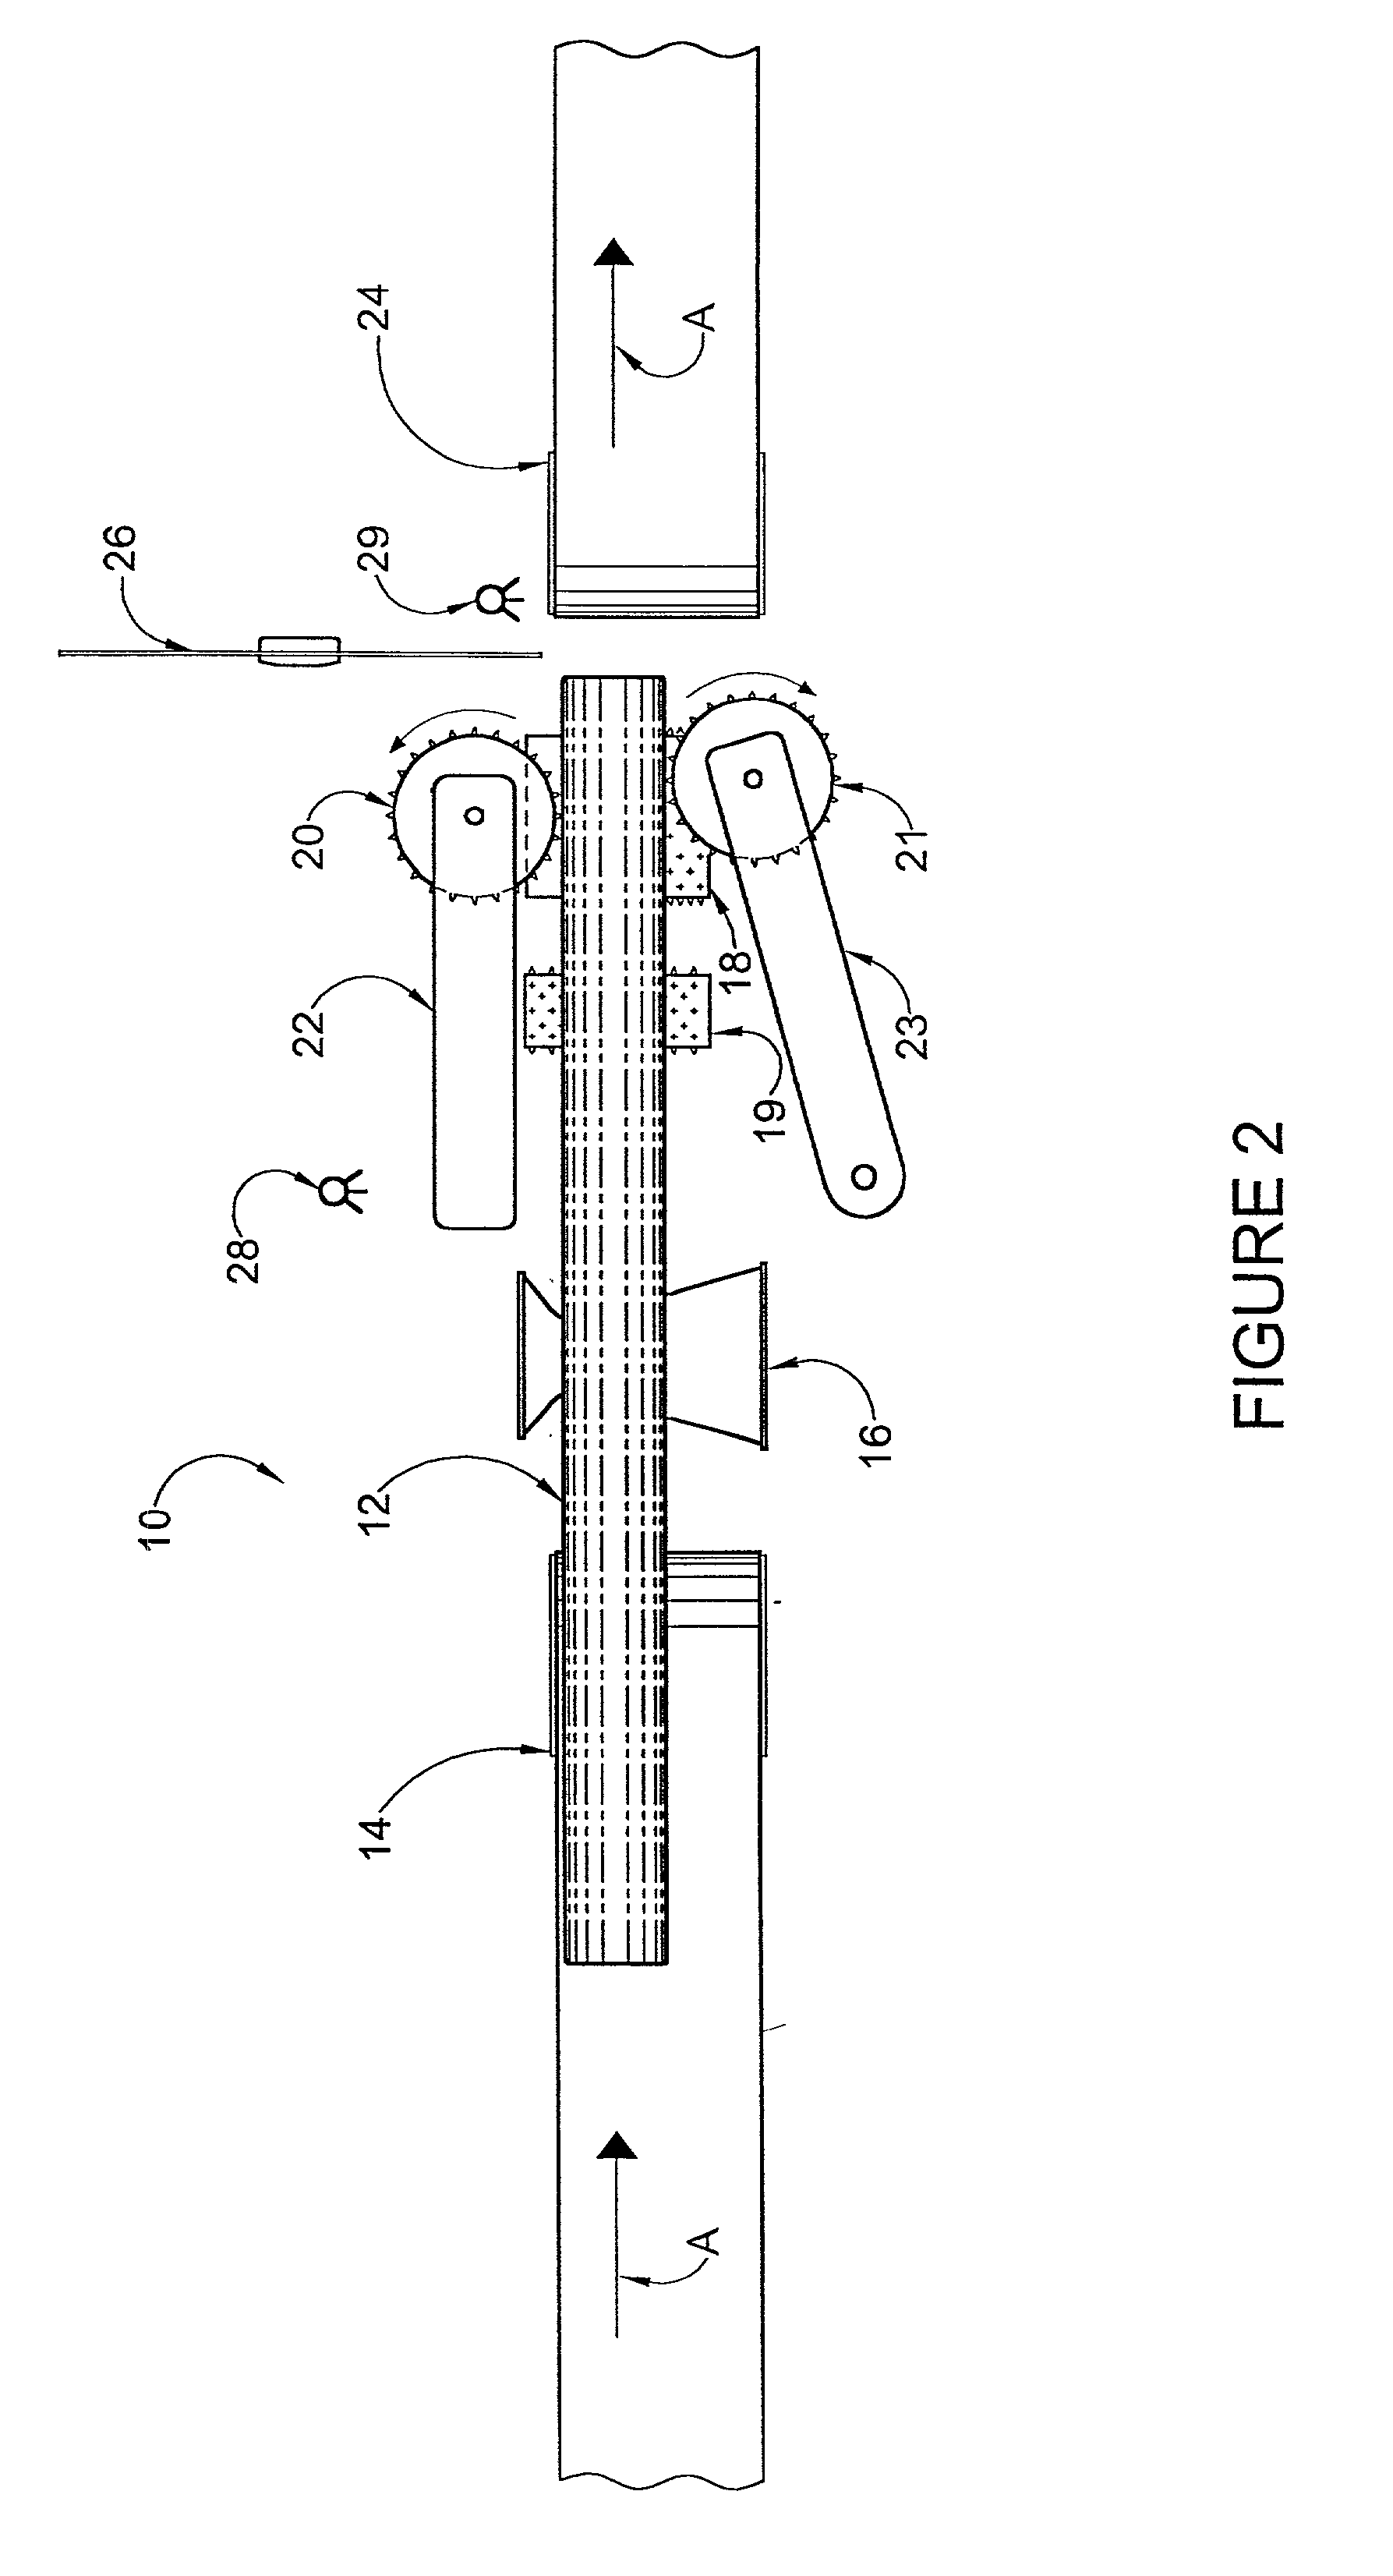 Method and apparatus for bucksawing logs